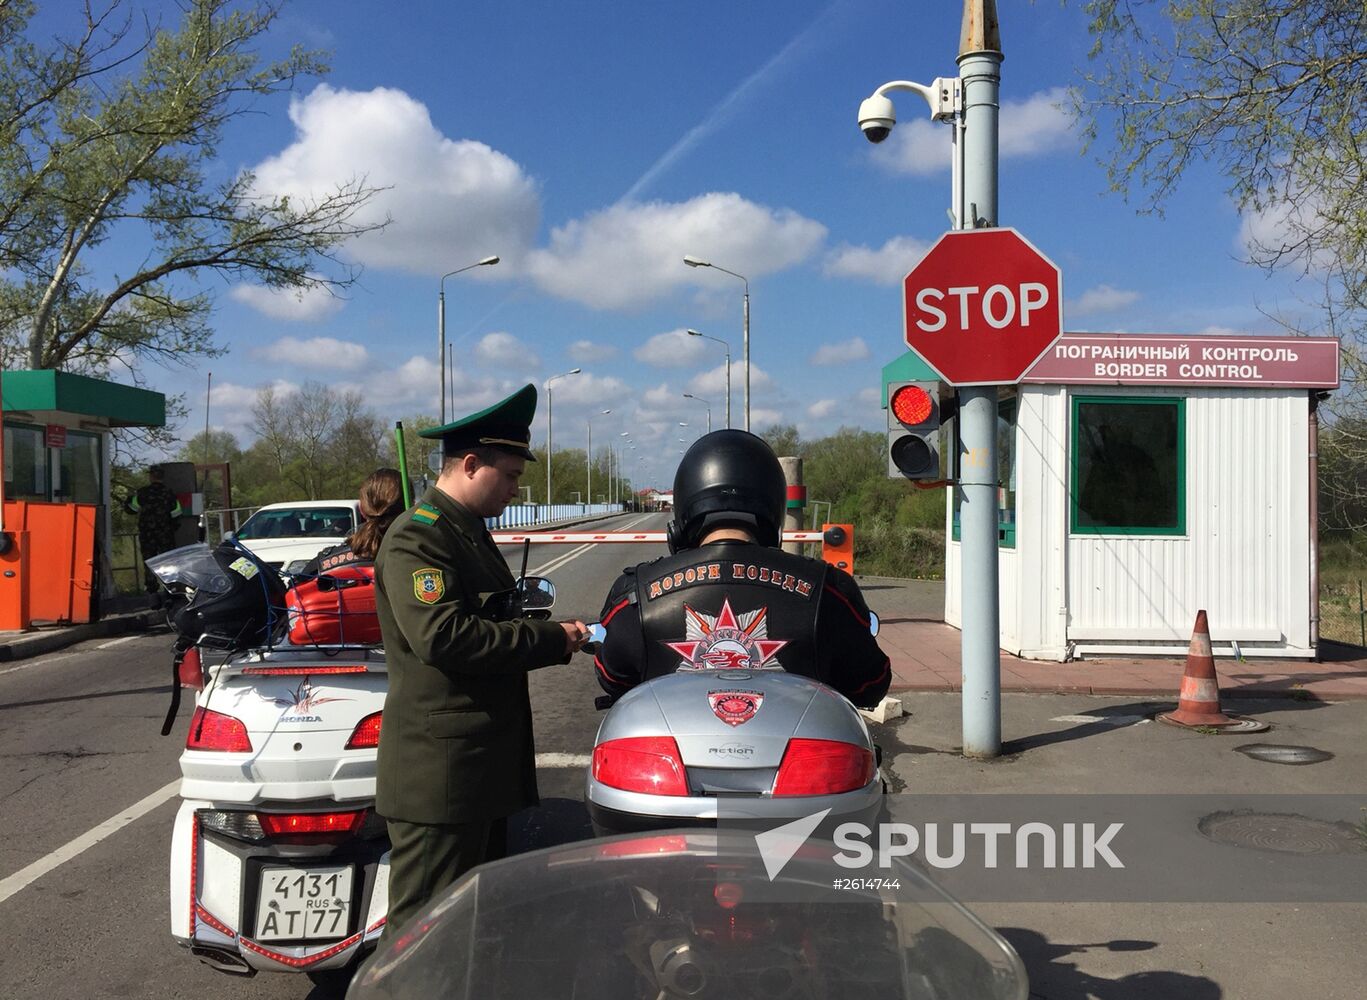 Members of Night Wolves bikers' club on the Belarusian-Polish border